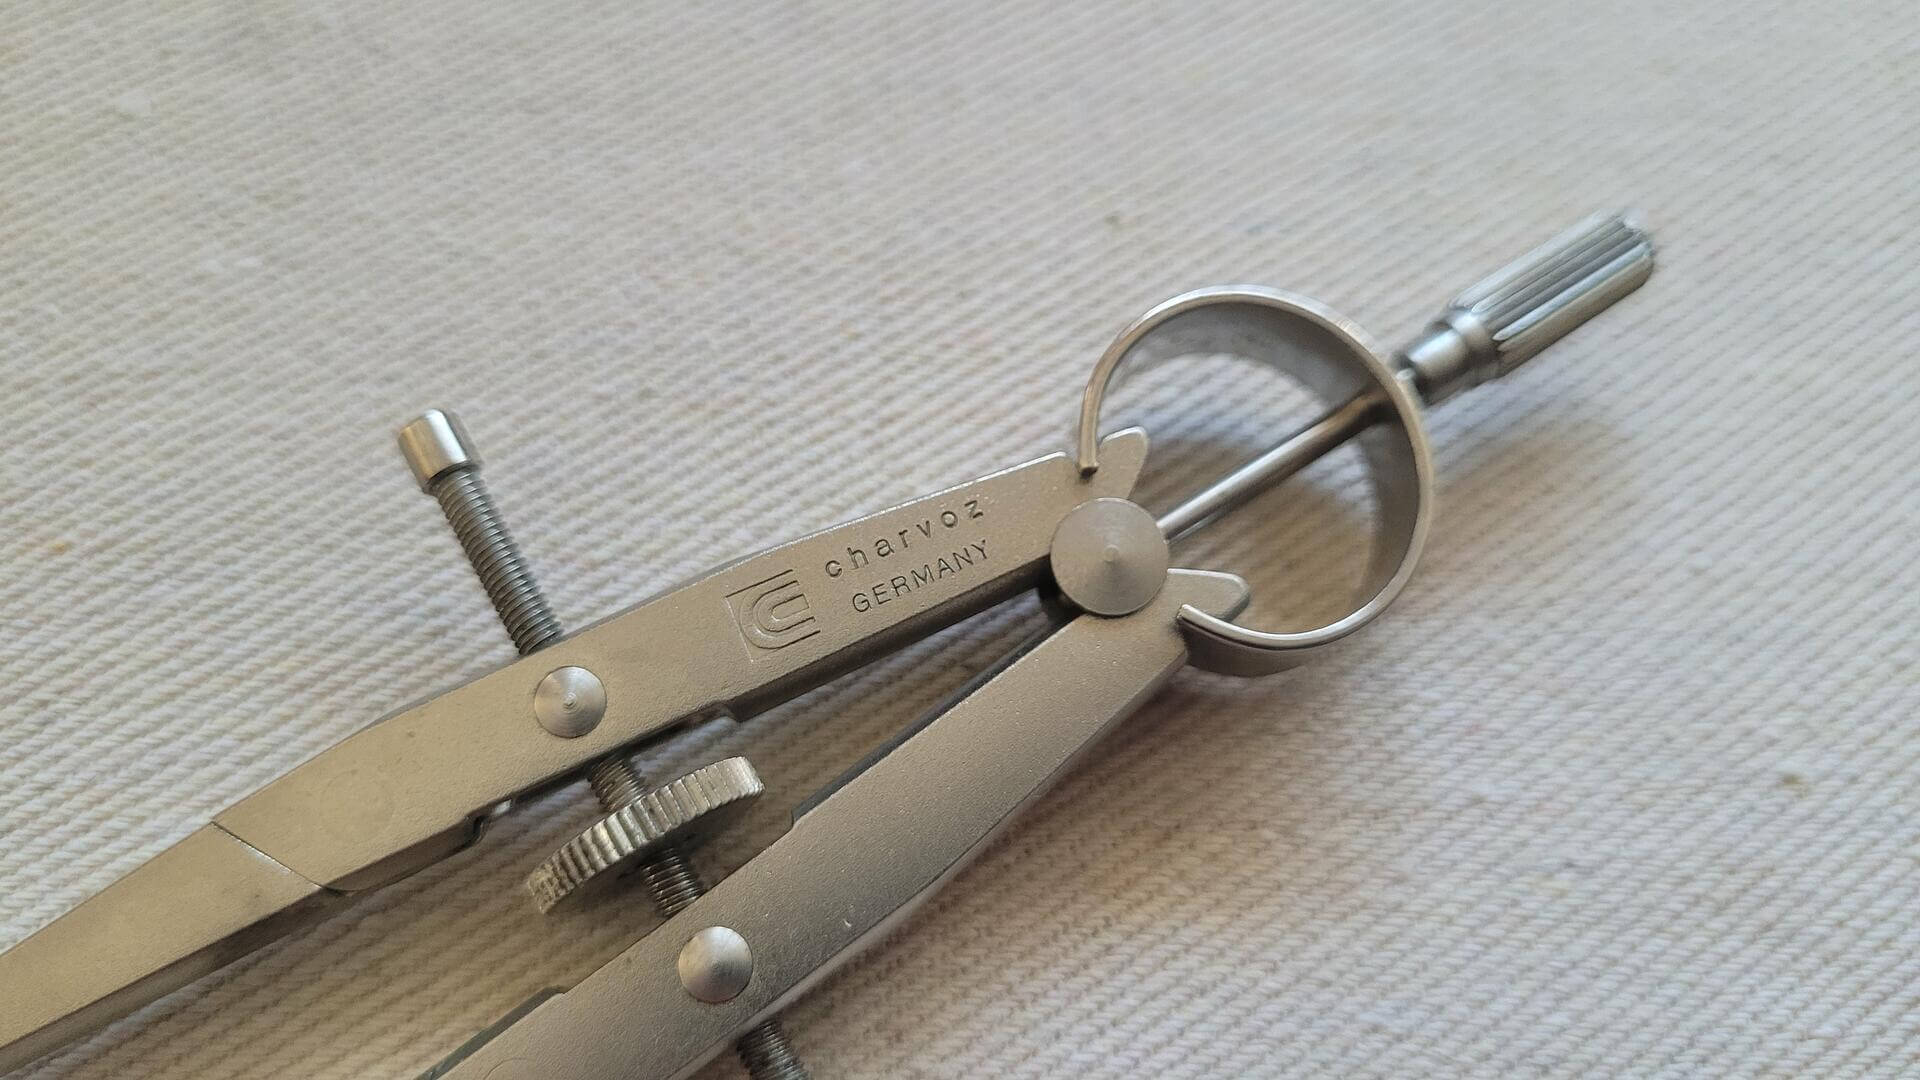 Charvoz No 11-3331 adjustable spring compass with the case and two extra pieces. Vintage made in Germany quality collectible drawing instrument and drafting tool